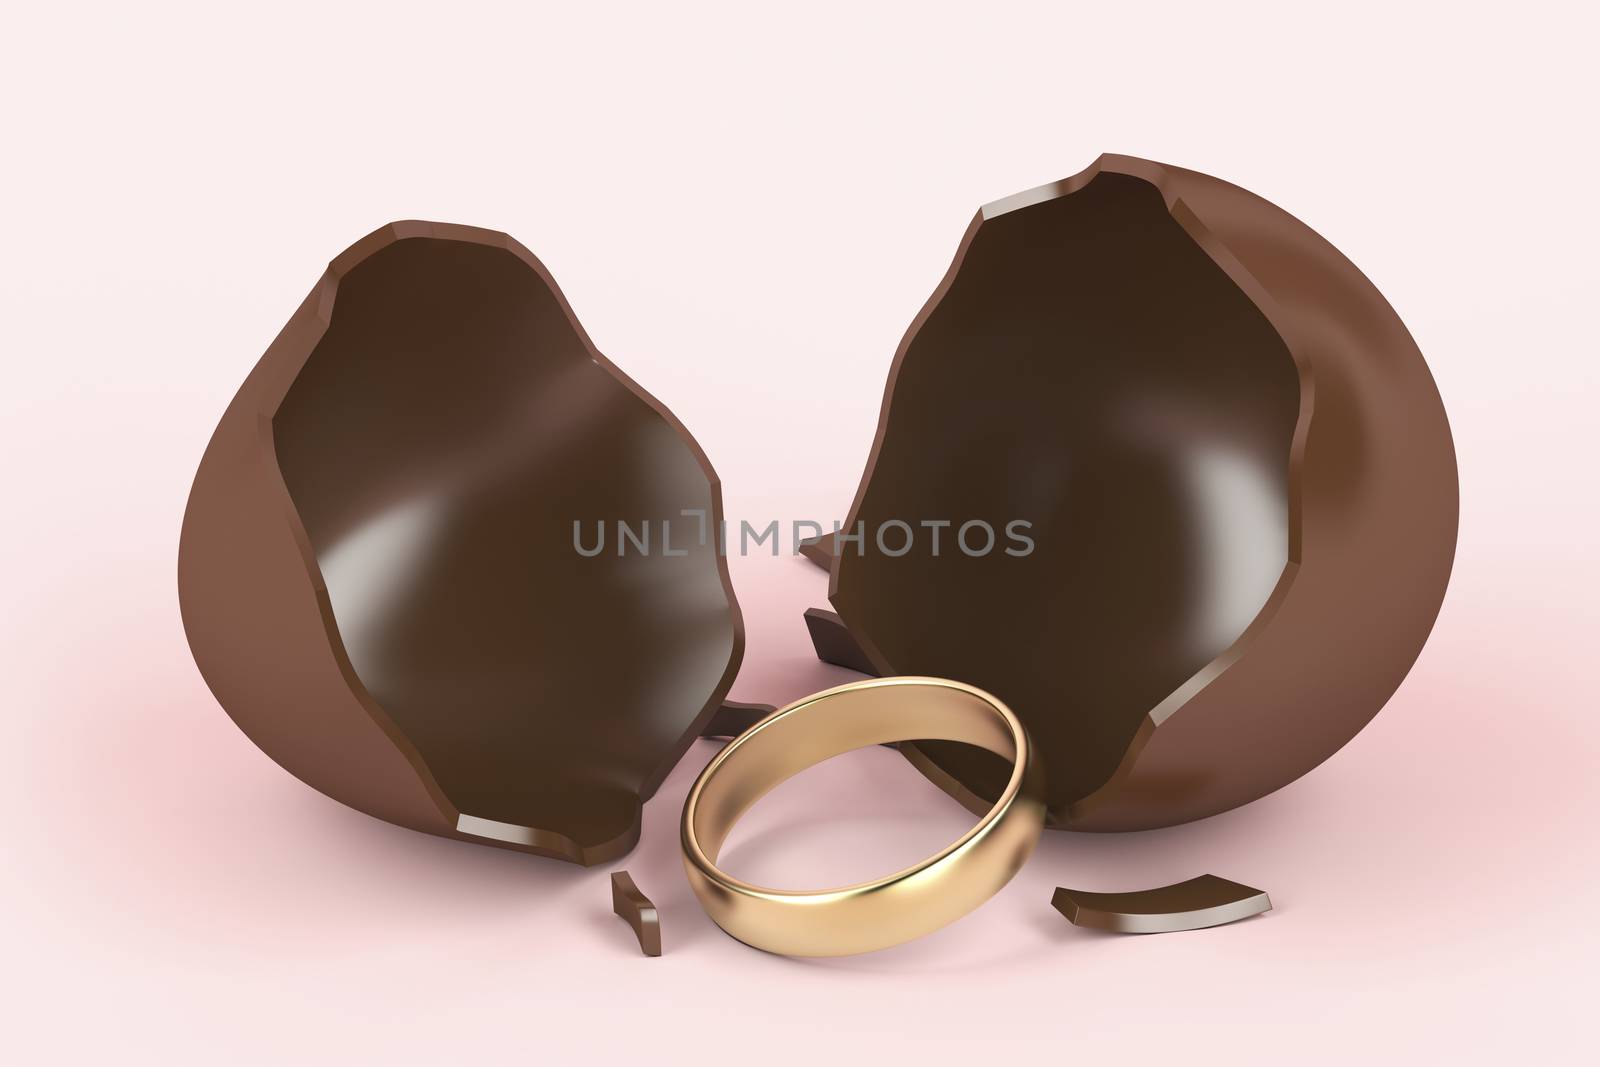 Chocolate egg and engagement ring by magraphics